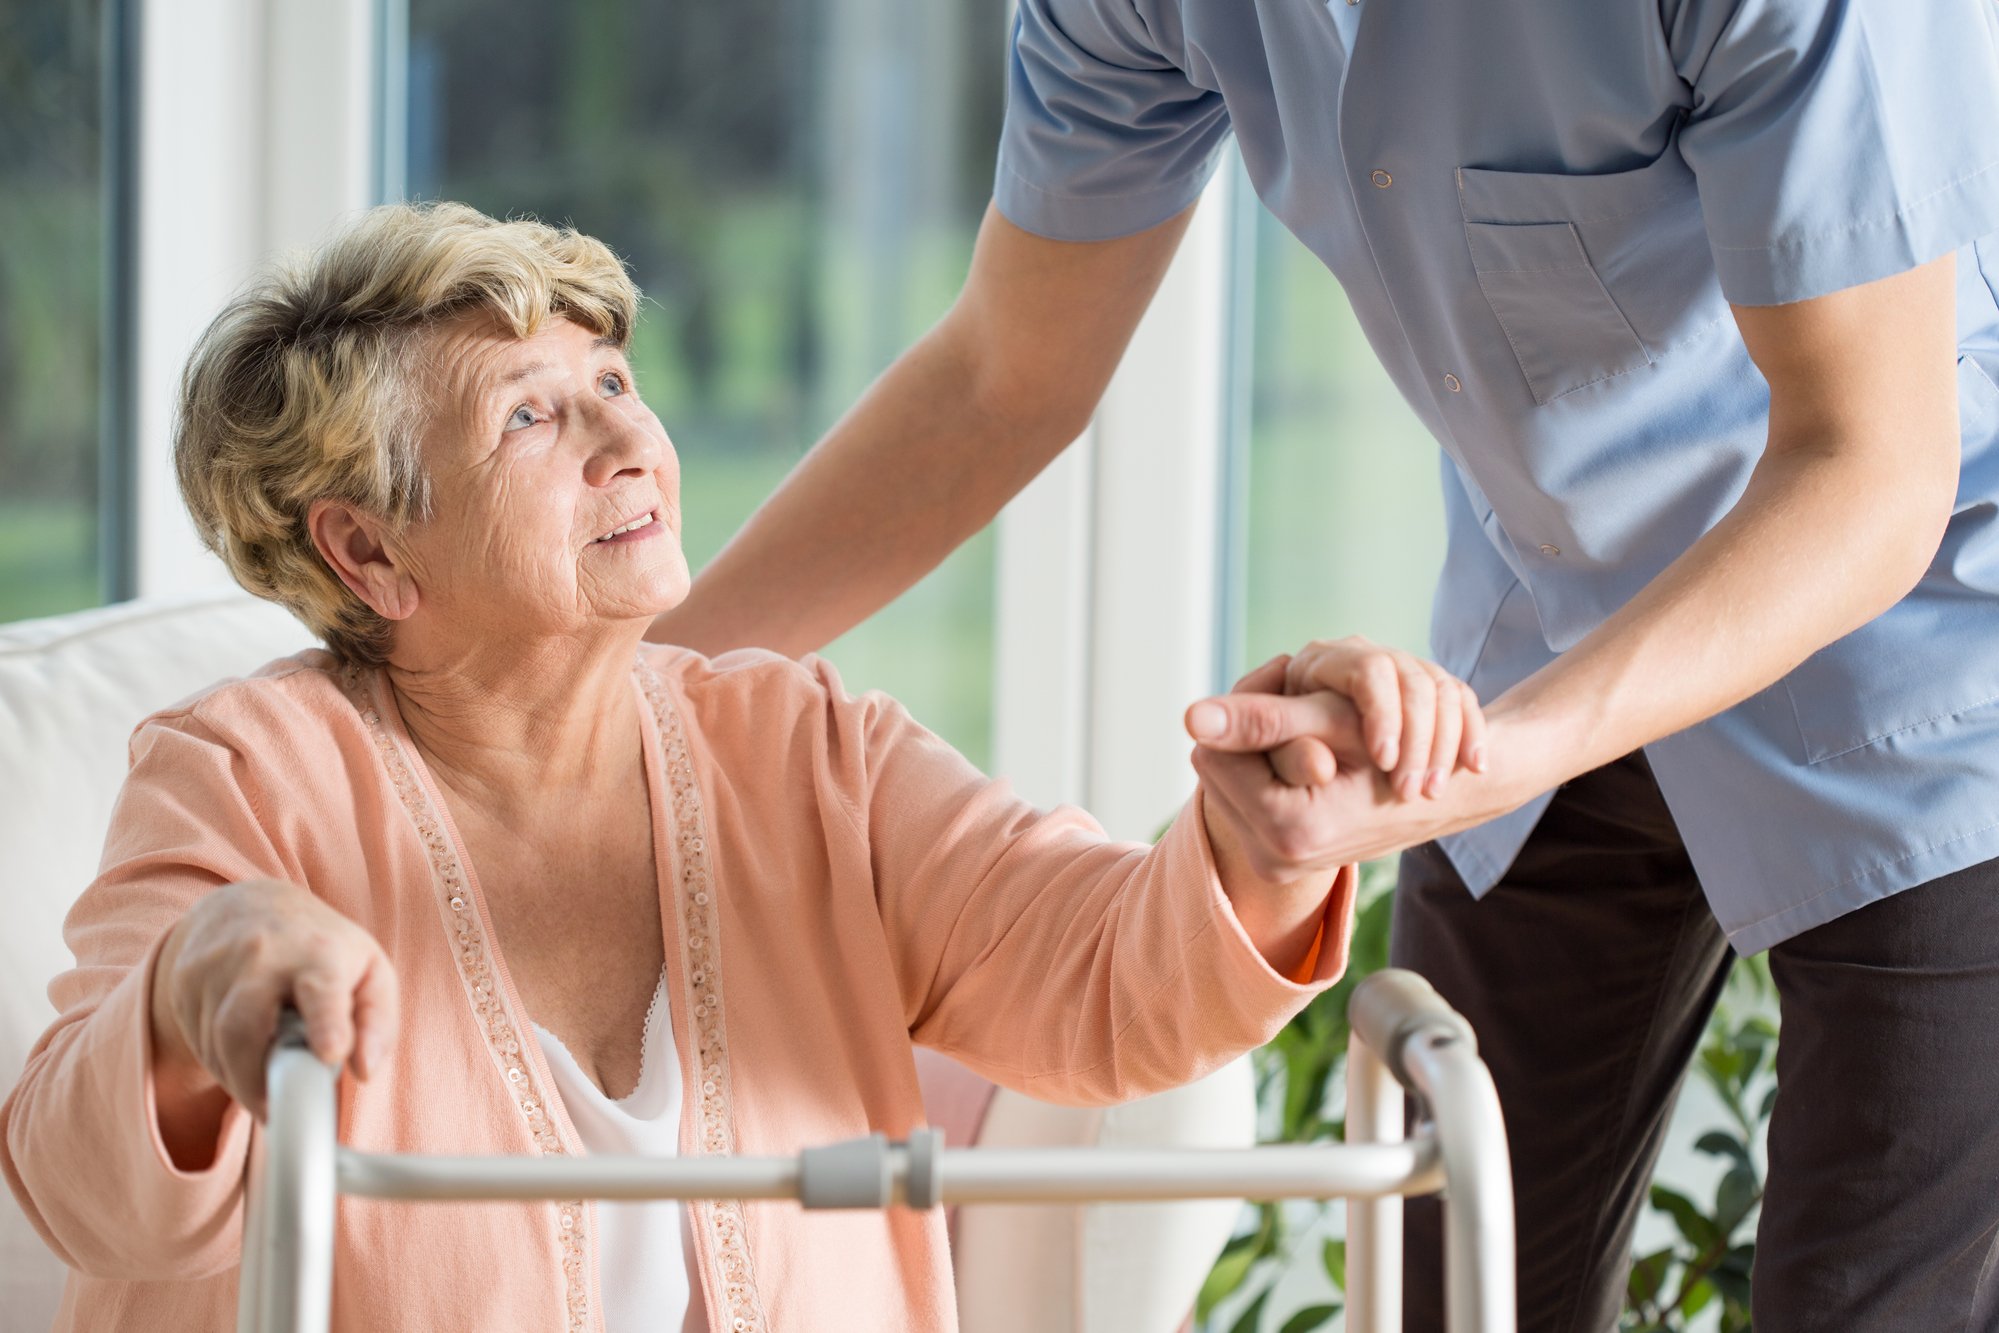 Preventing Falls In Someone with Dementia